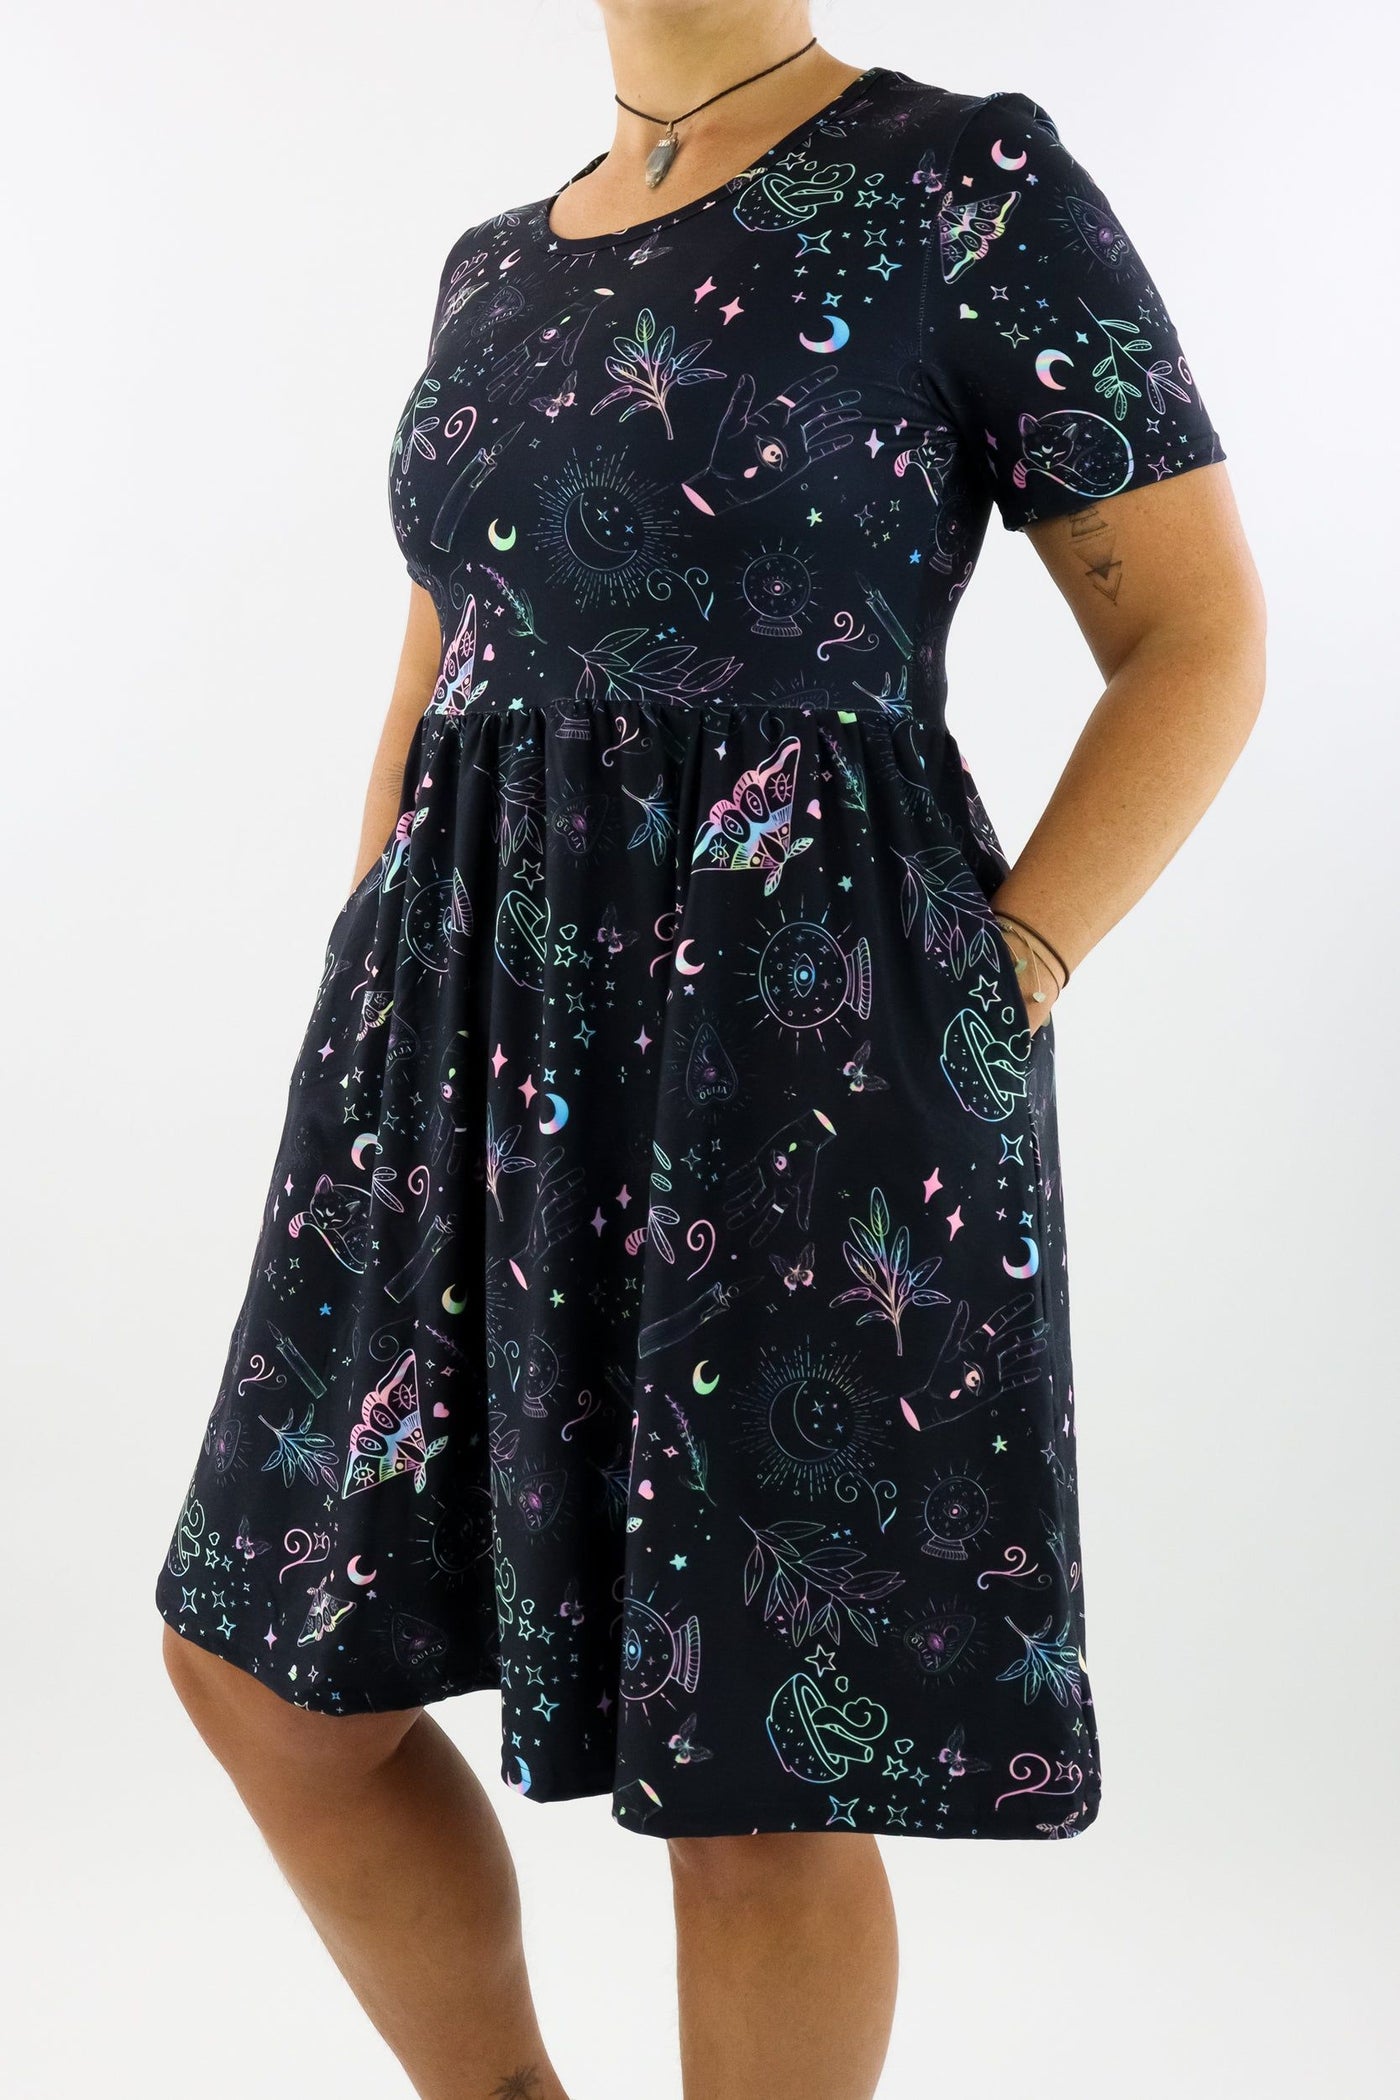 Holographic Witch - Short Sleeve Skater Dress - Knee Length - Side Pockets Knee Length Skater Dress Pawlie   